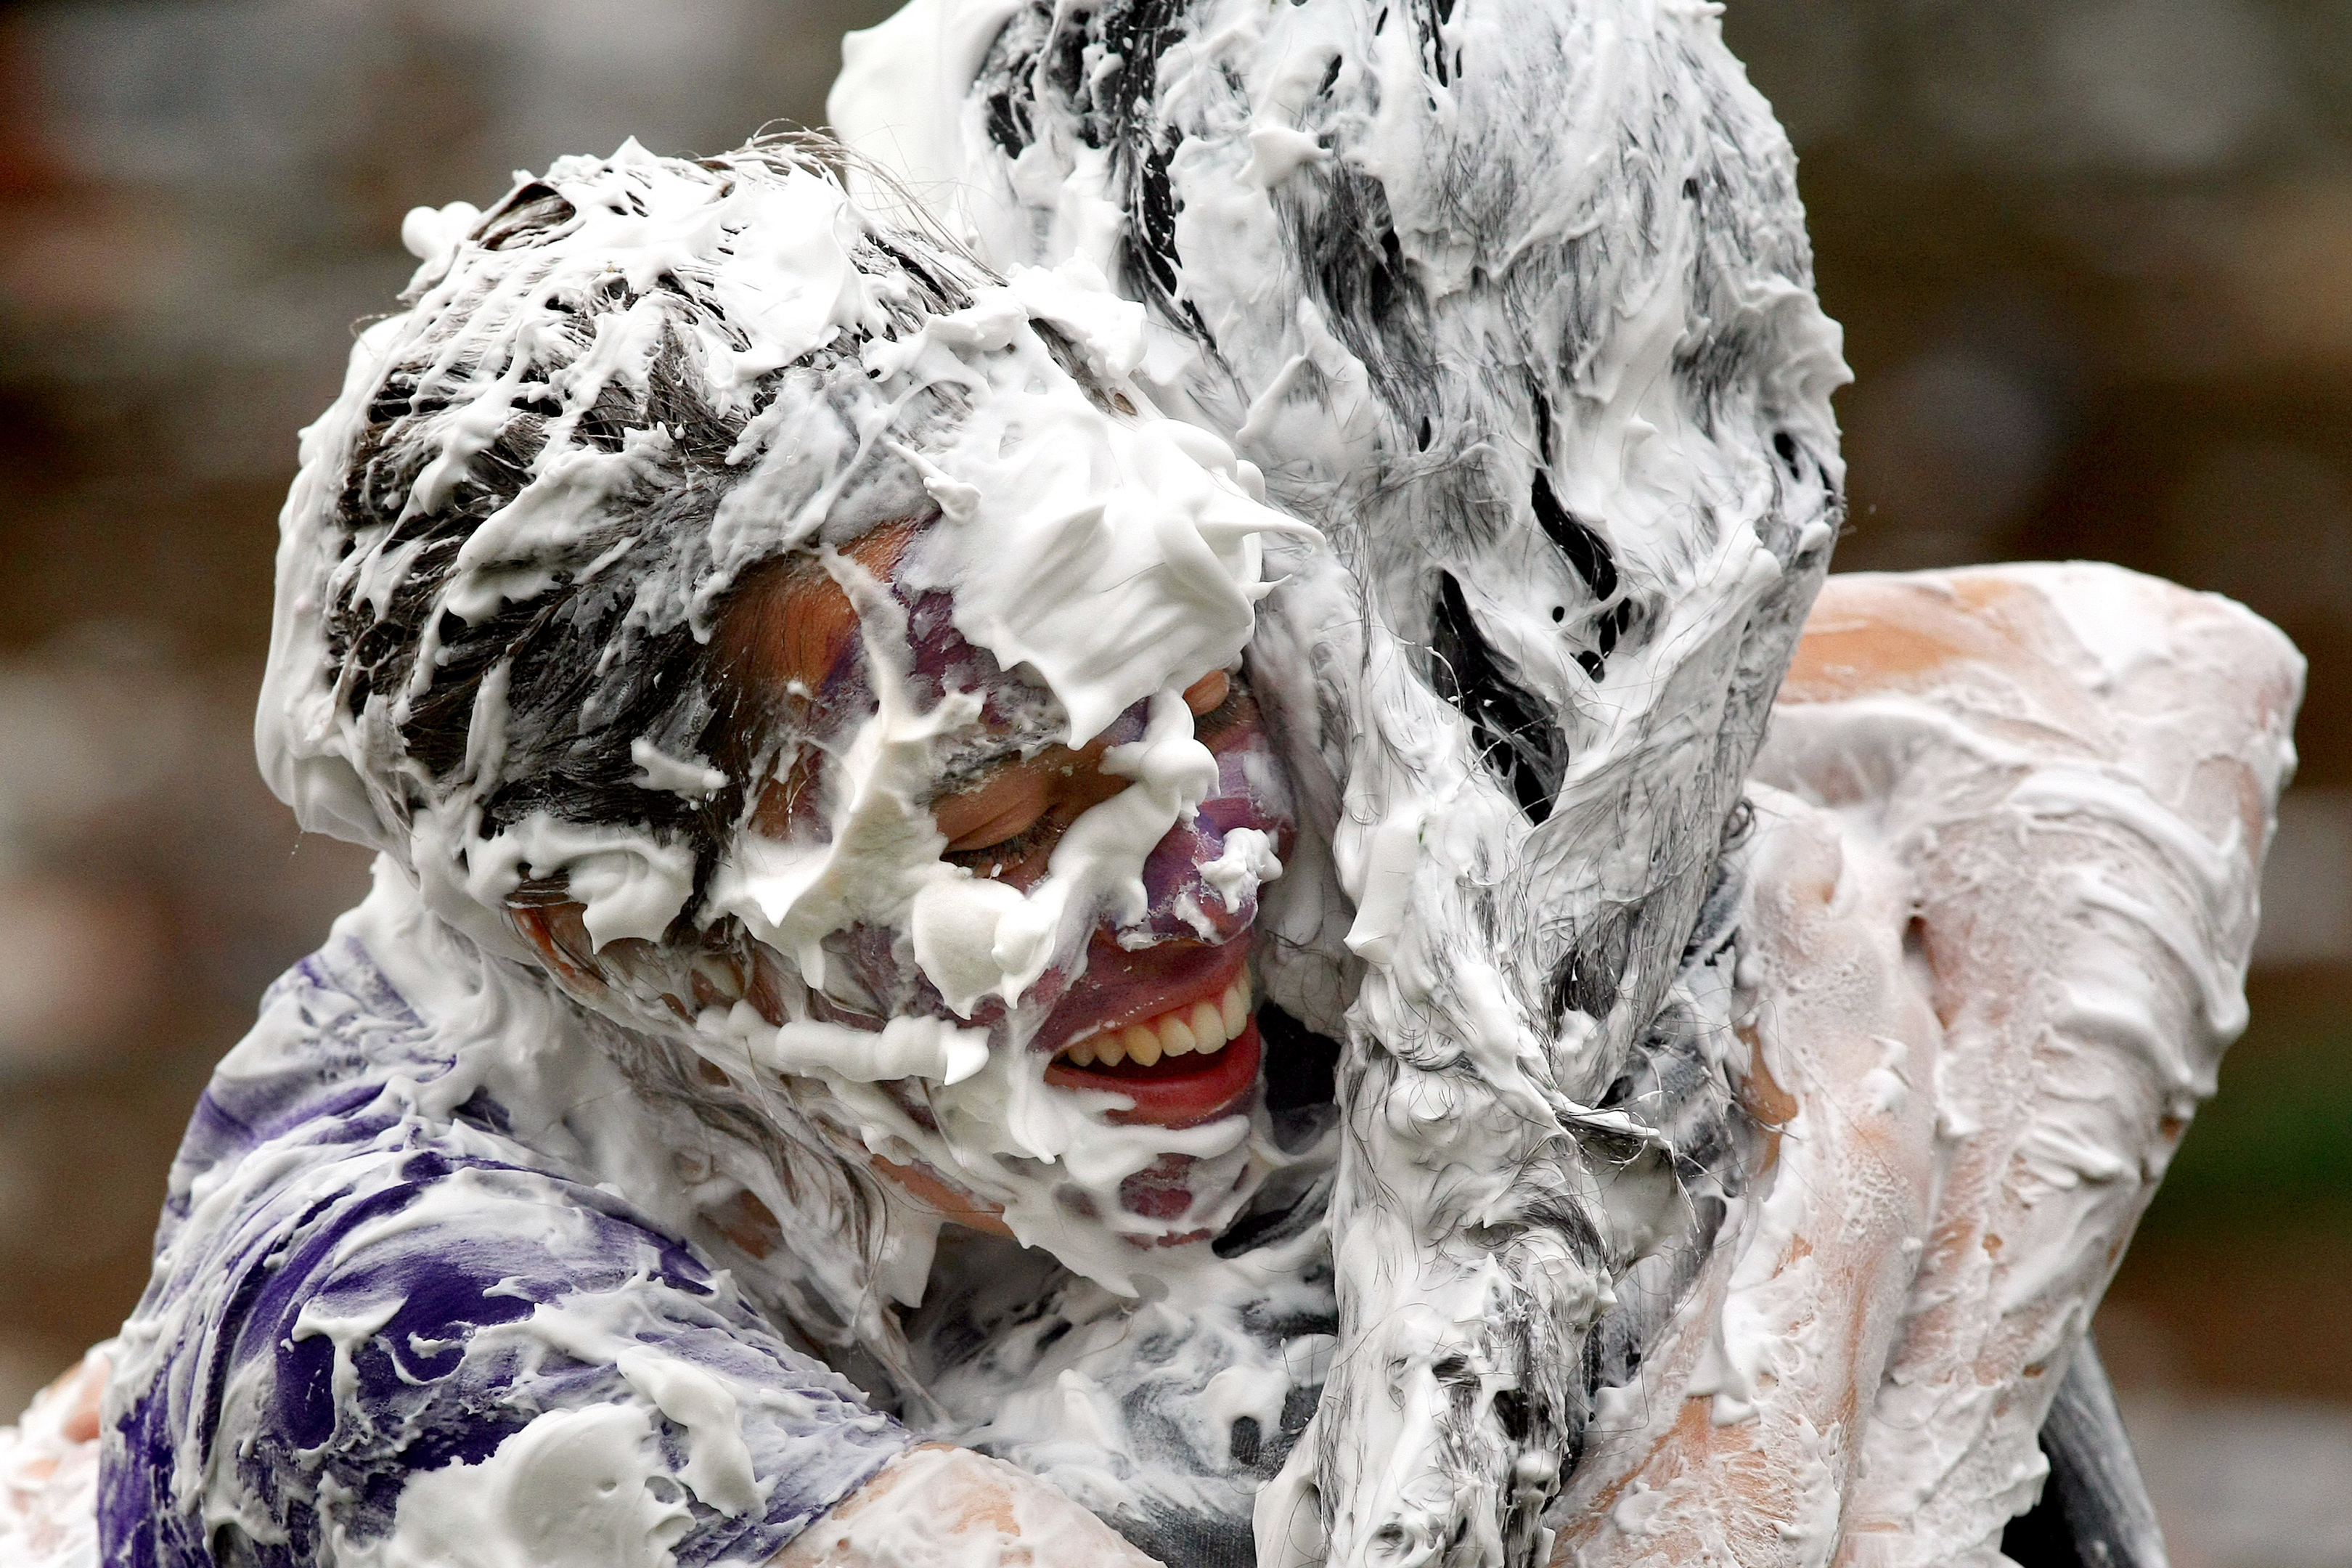 New students are welcomed to St Andrews with the famous Raisin Monday foam fight.